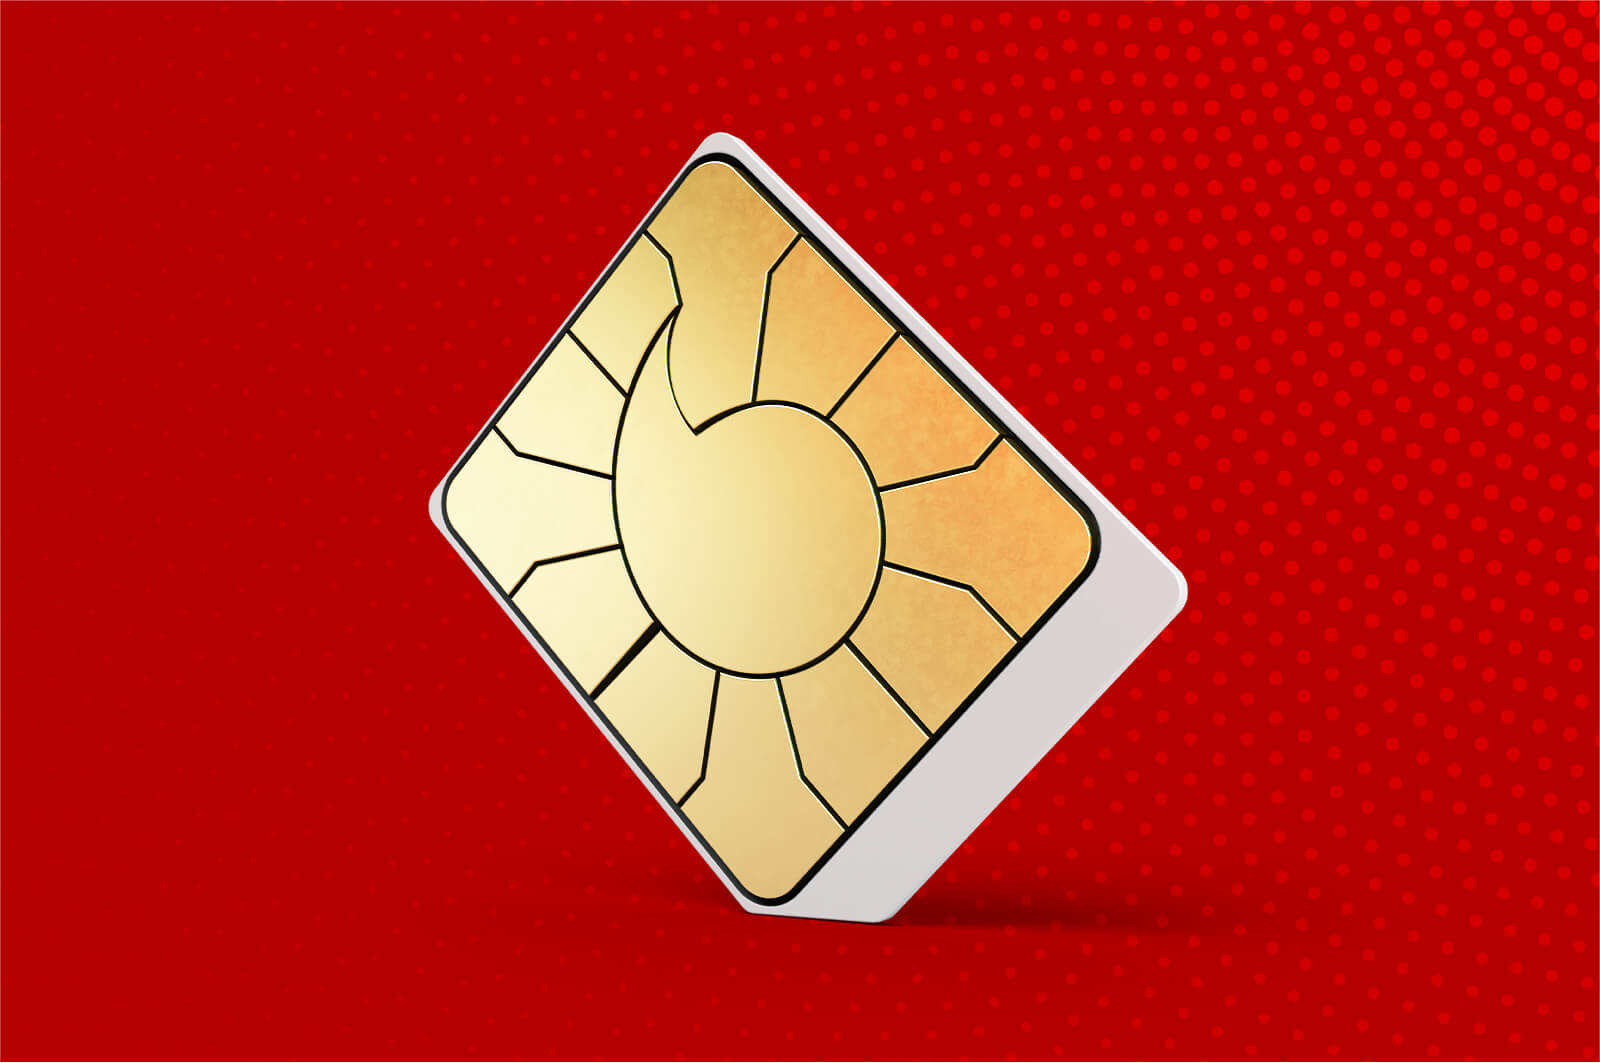 SIM card on a red background